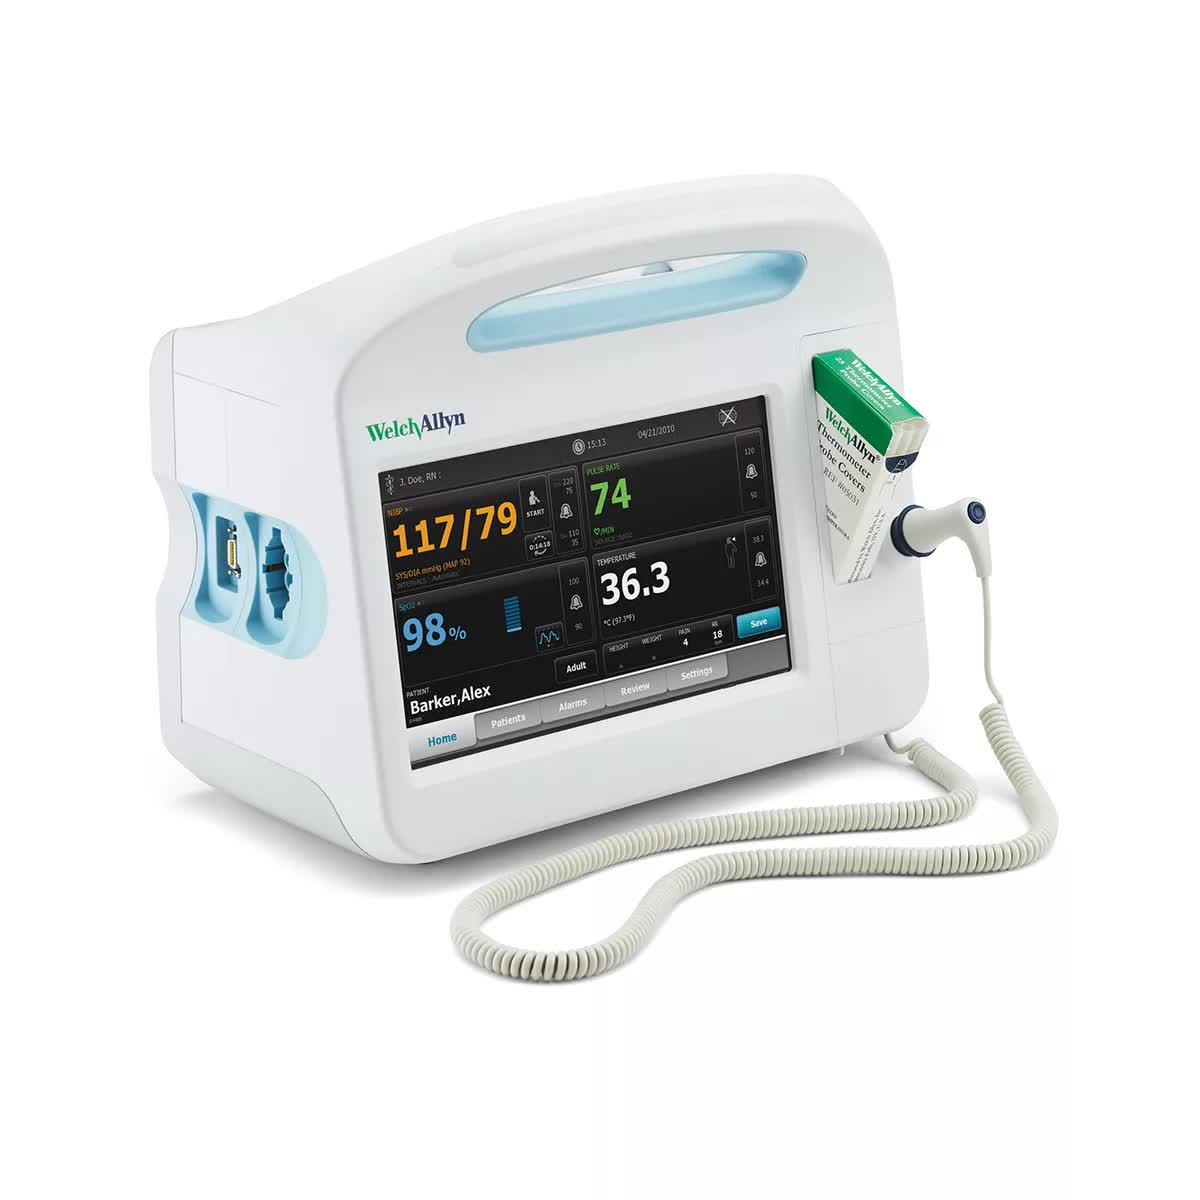 Welch Allyn Connex 6800 Series Wireless Vital Signs Monitor with Masimo SpO2, etCO2 and SureTemp Plus